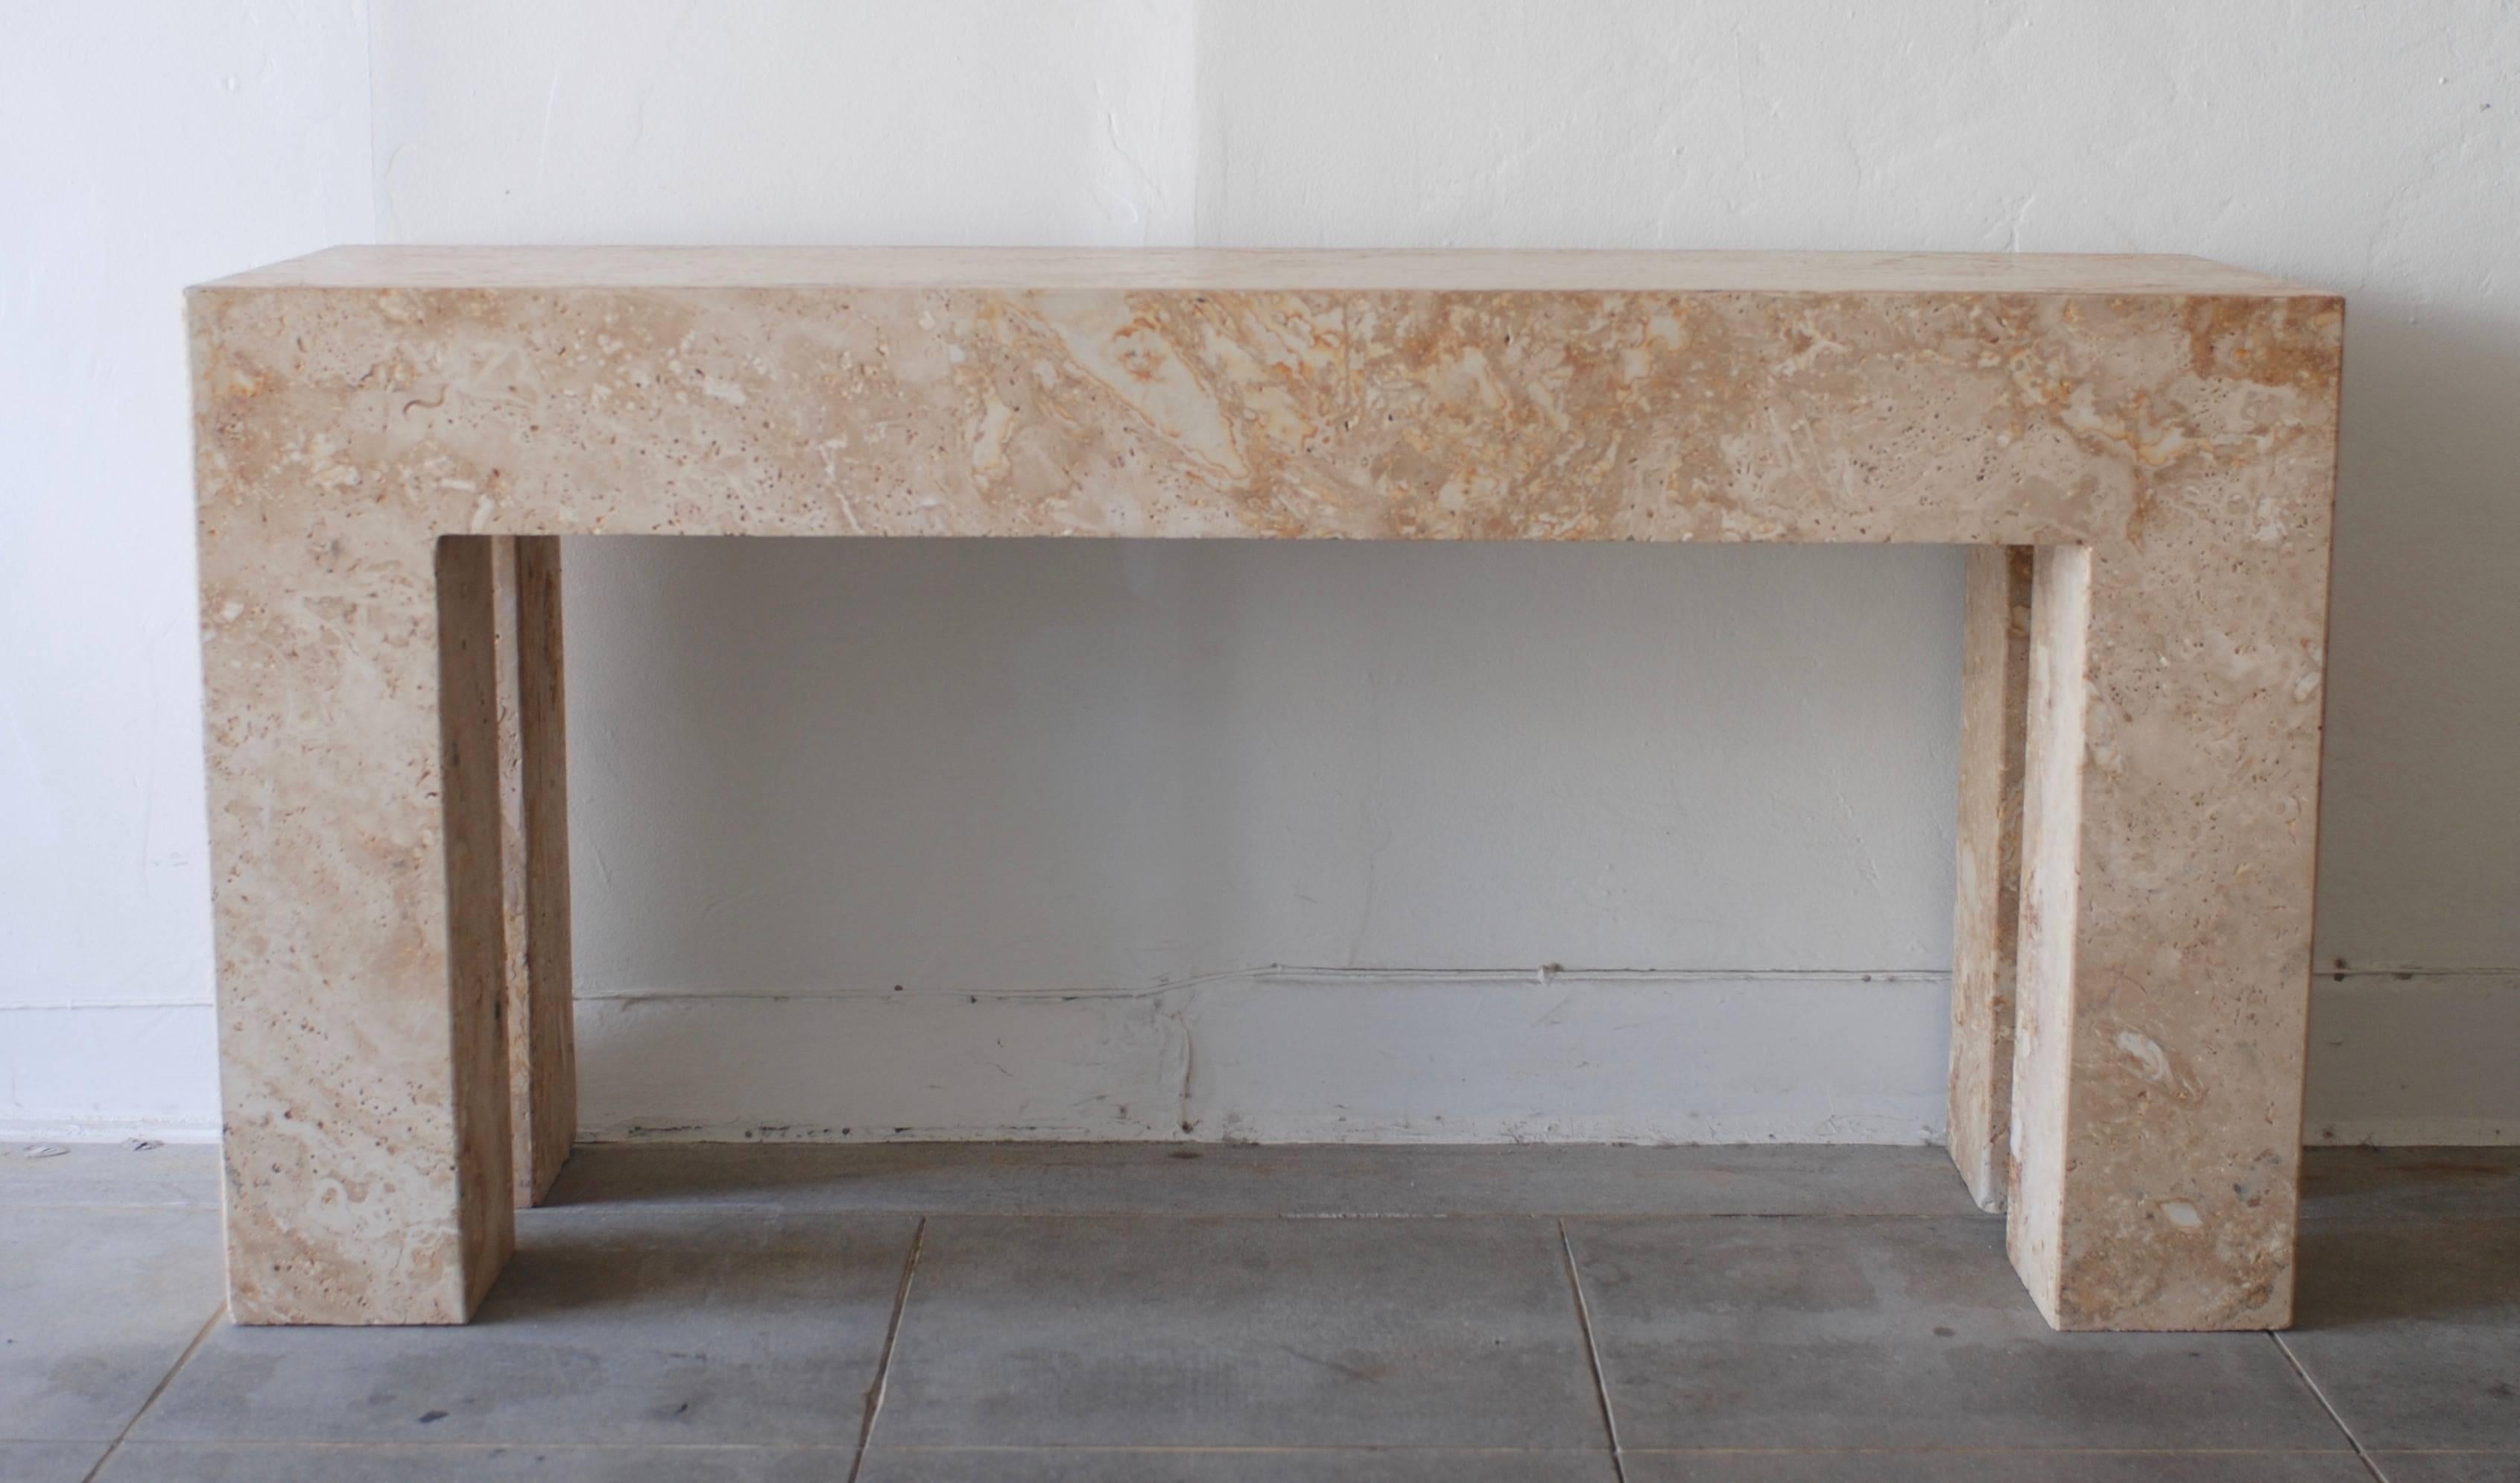 In the style of Steve Chase this heavy travertine console table has great proportions. The travertine has a pale warm almost golden color.